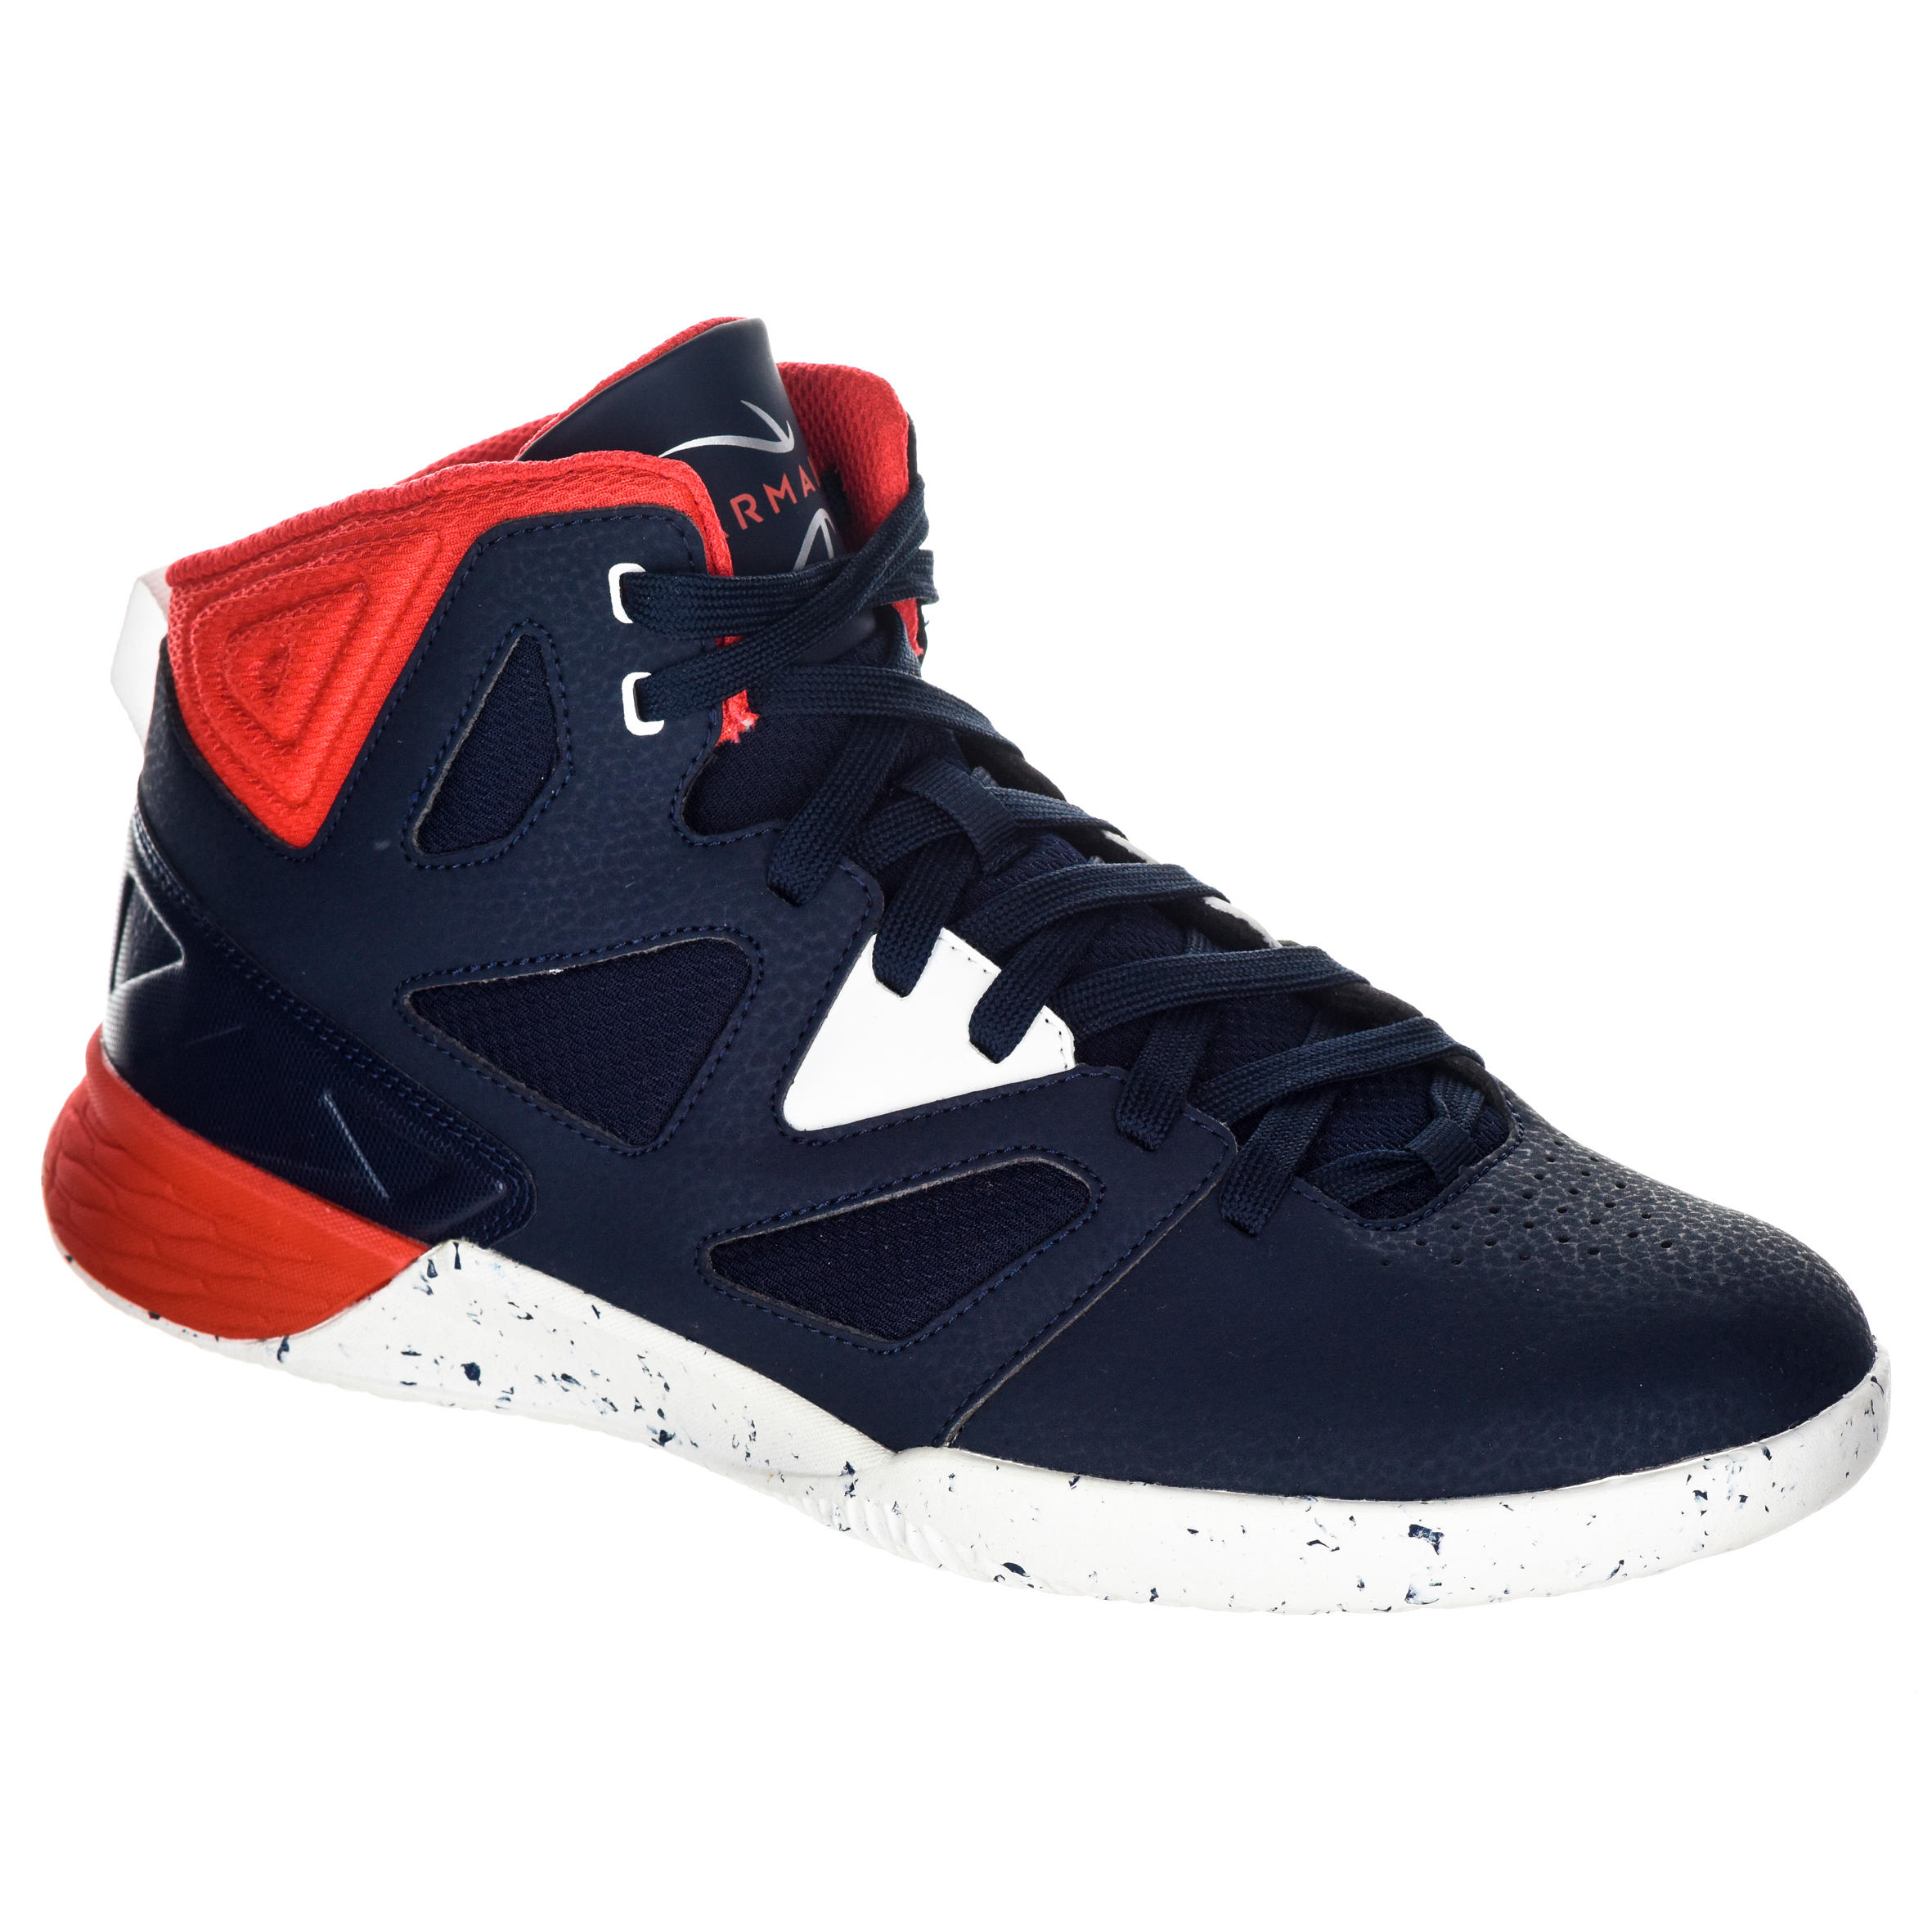 Womens Basketball Shoes Buy Online 